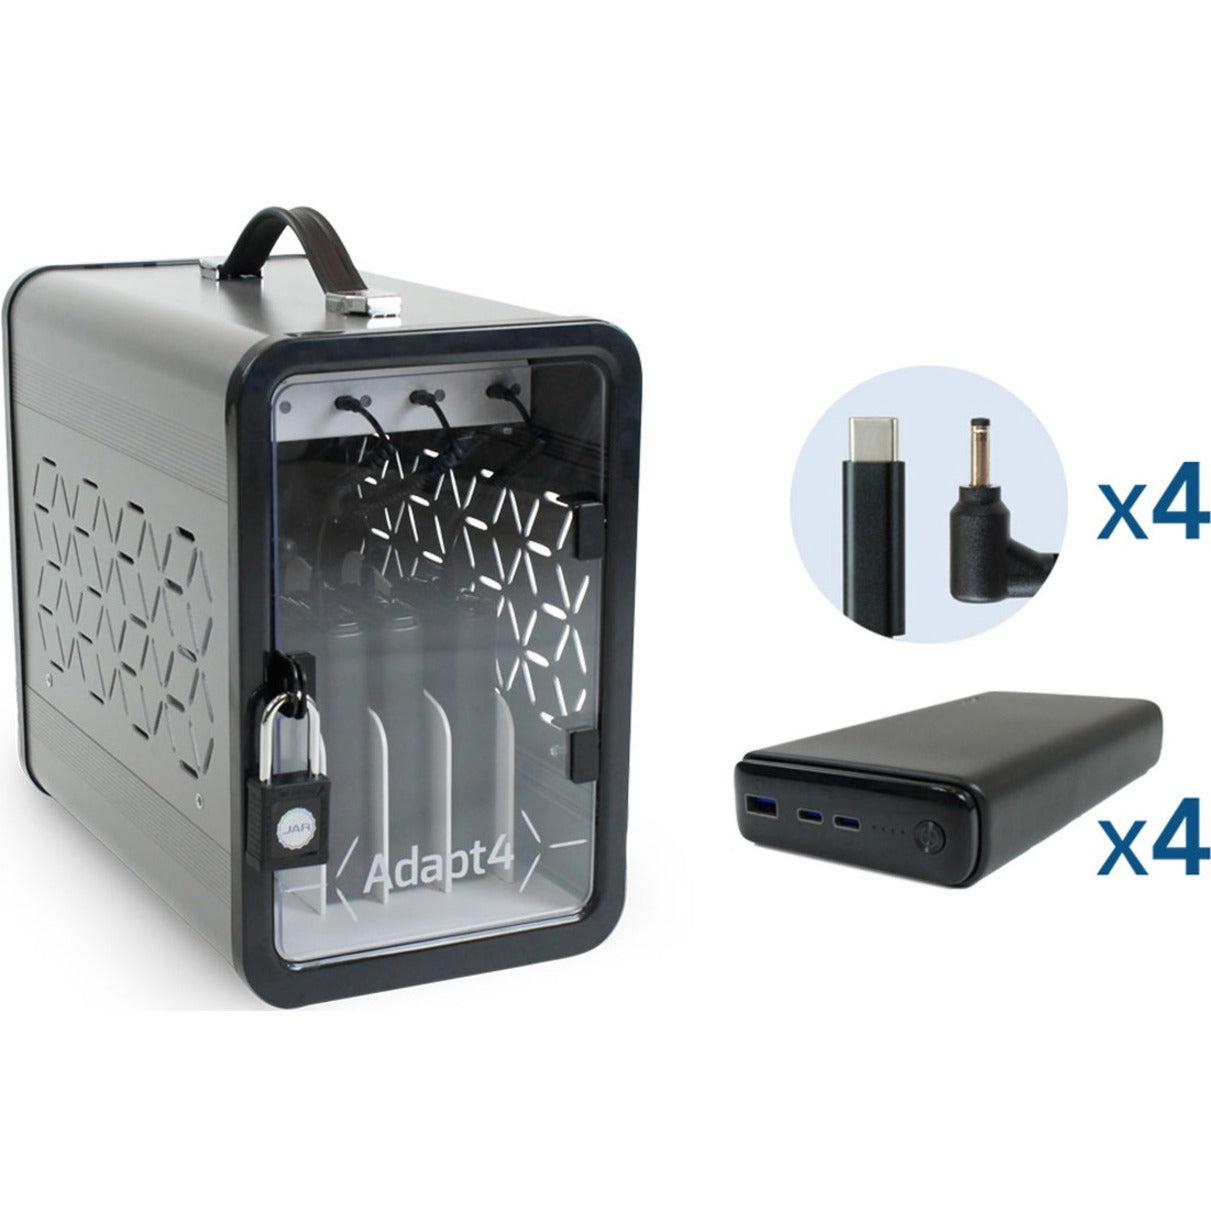 JAR Systems A4USBC2YPBC72 Adapt4 USB-C Charging Station Active Charge Upgrade with Acer Connectors, Chromebooks, Notebooks, Tablets